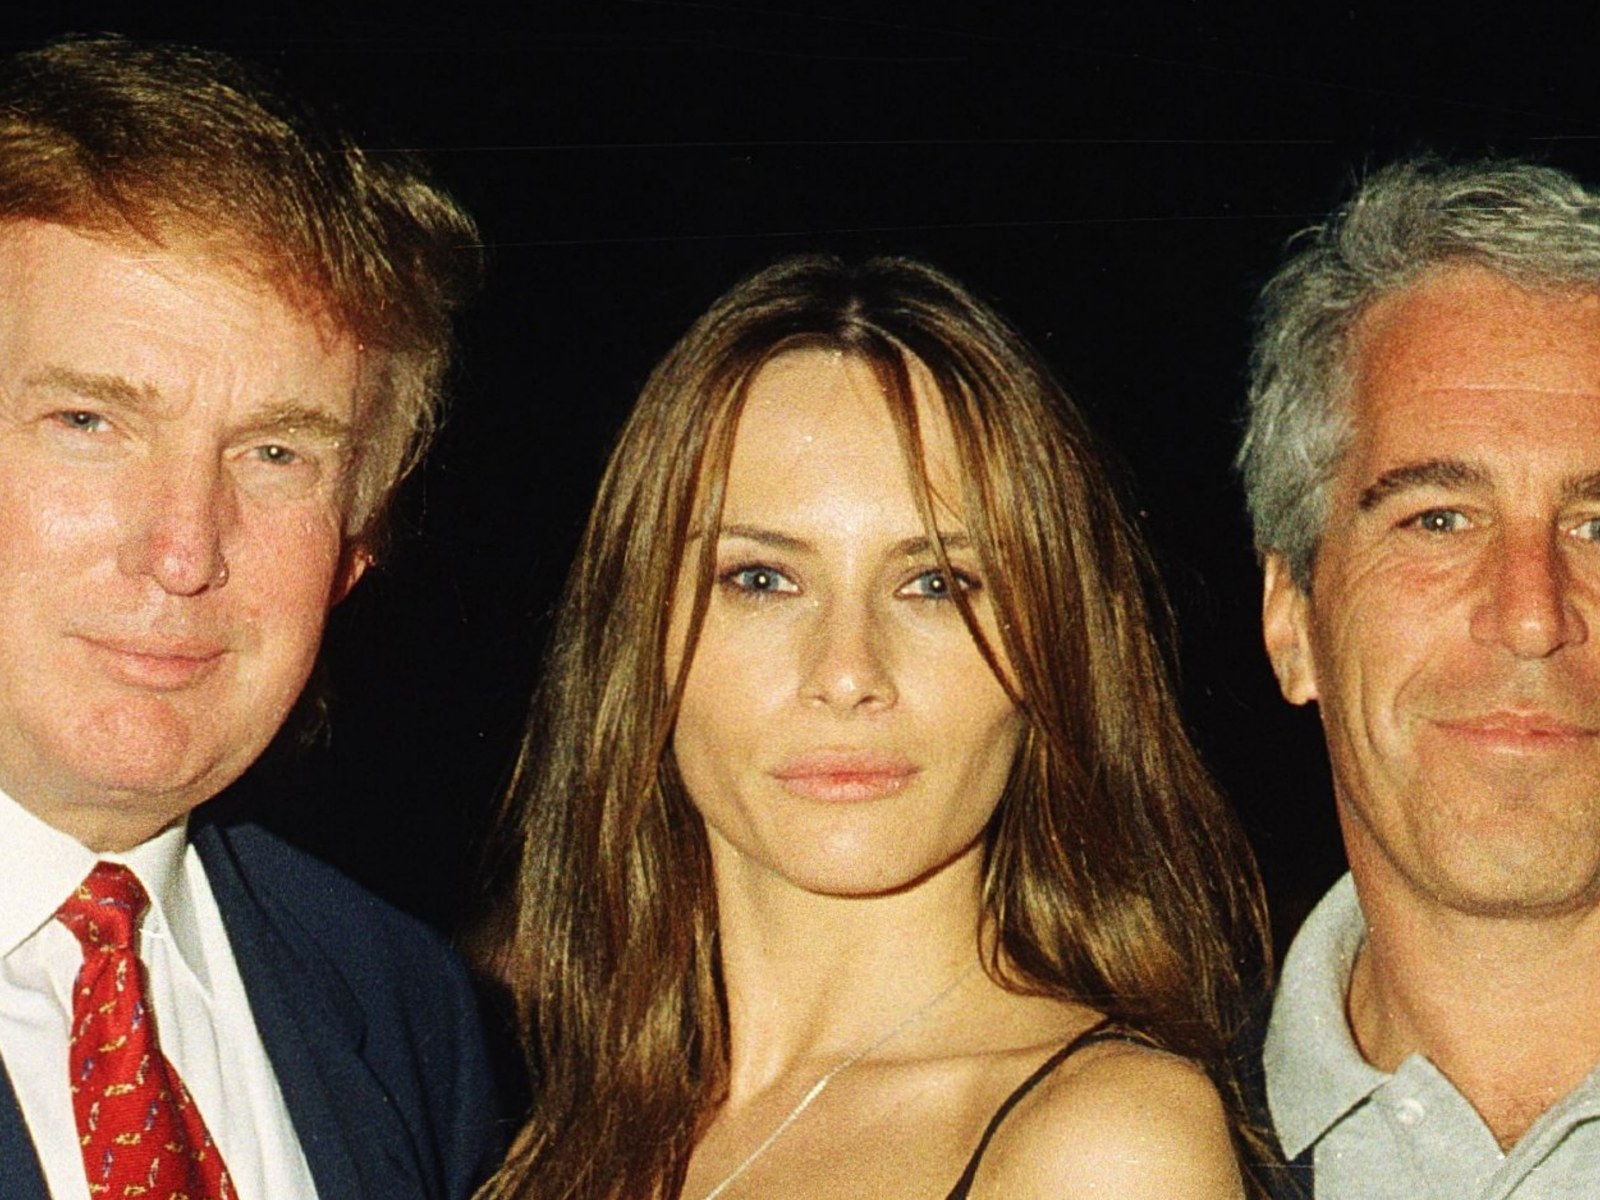 Jeffrey Epstein Told Inmates About Donald Trump and Bill Clinton Before  Death, Book Claims